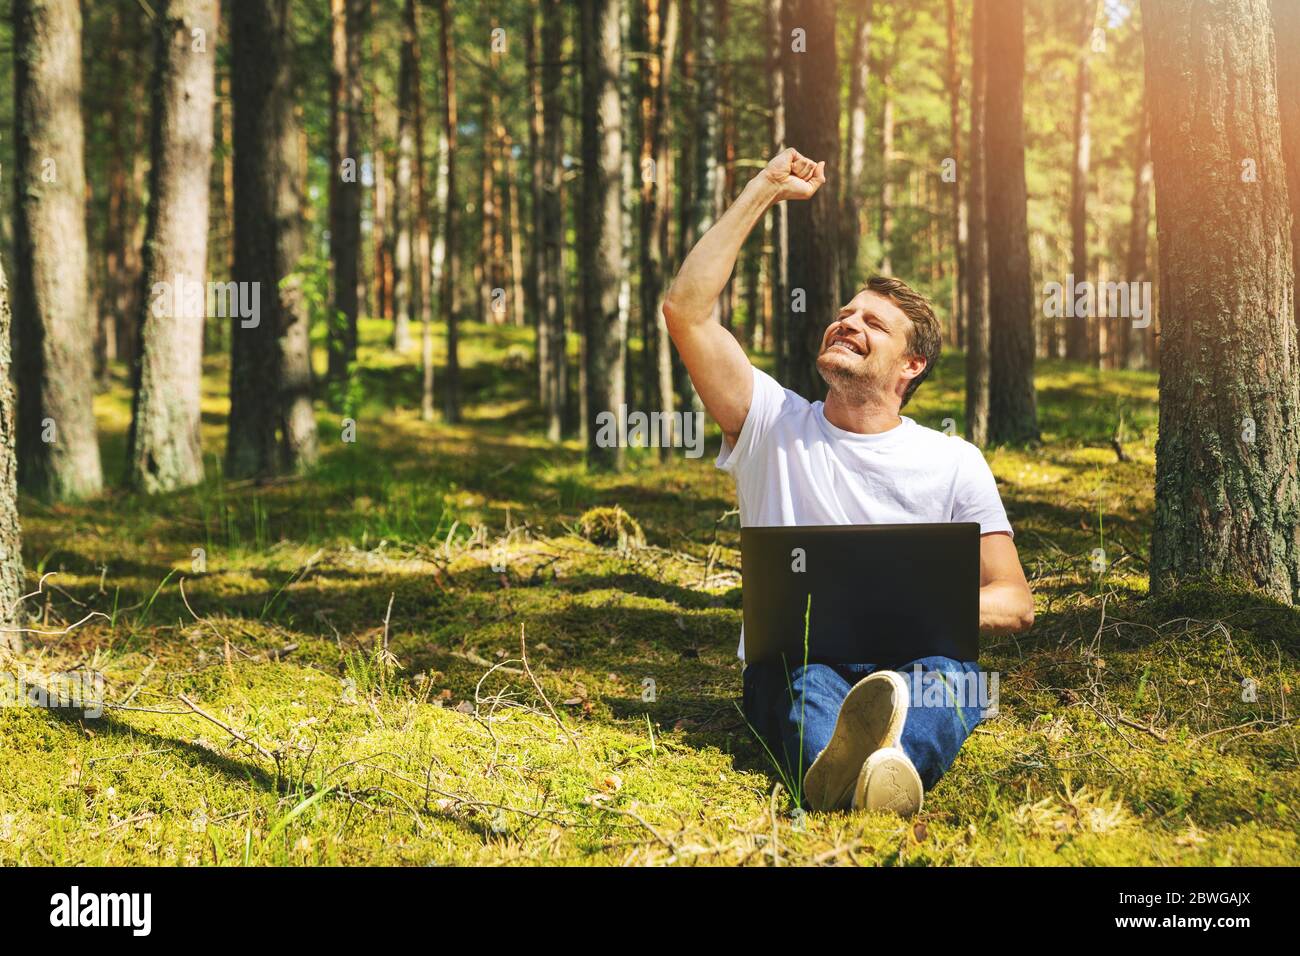 cheerful freelancer with hand raised working outdoors Stock Photo